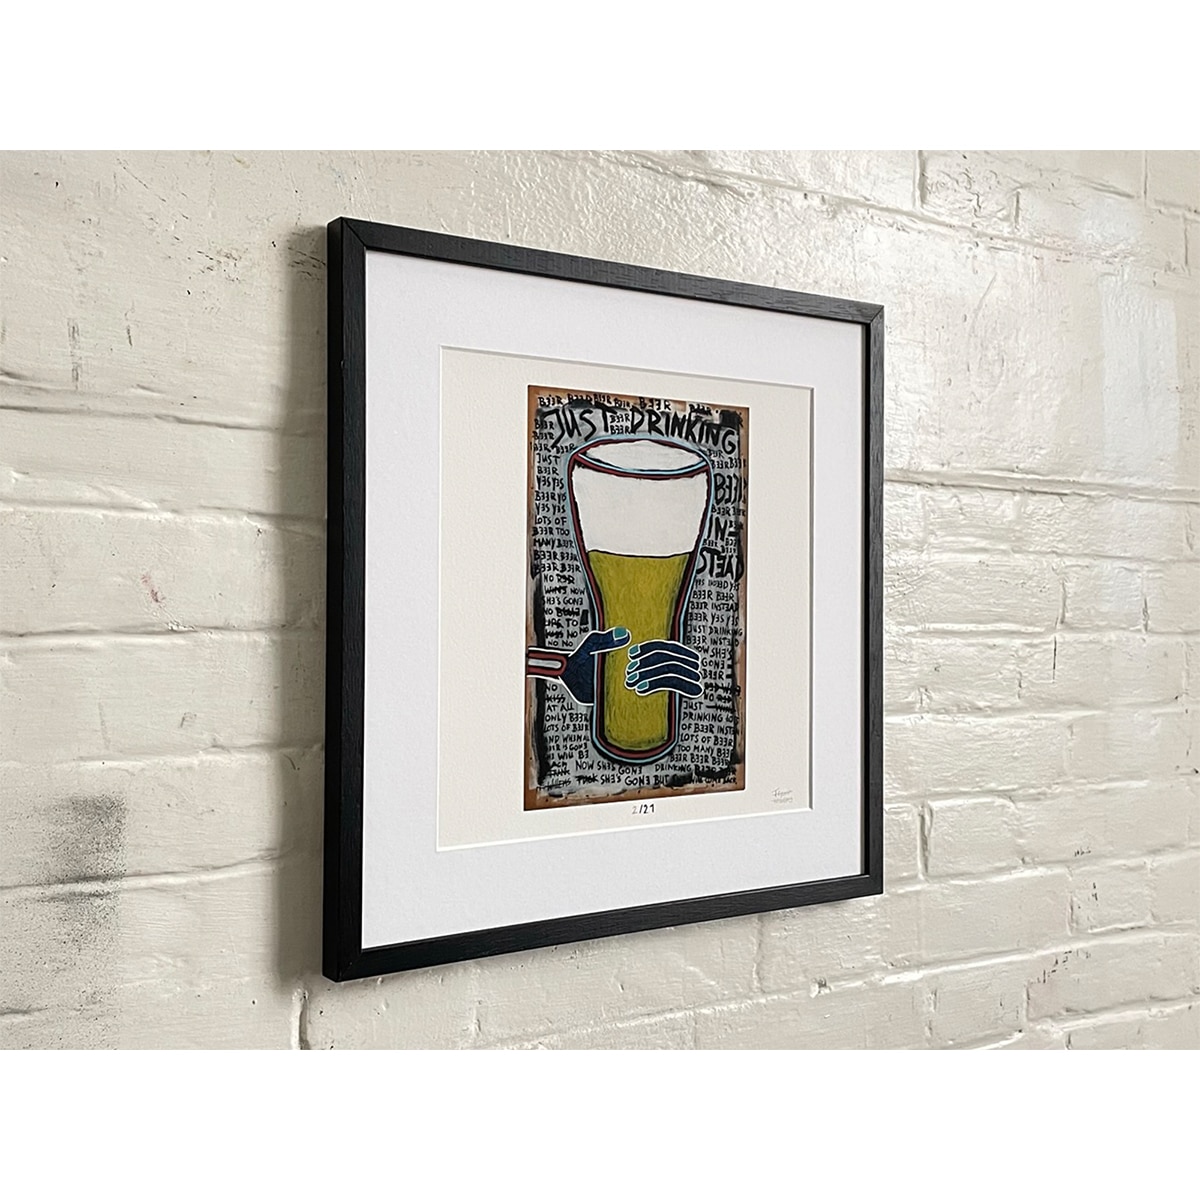 Limited Edt Art Prints -_0000__0000_JUST DRINKING BEER INSTEAD 01 - Frank Willems